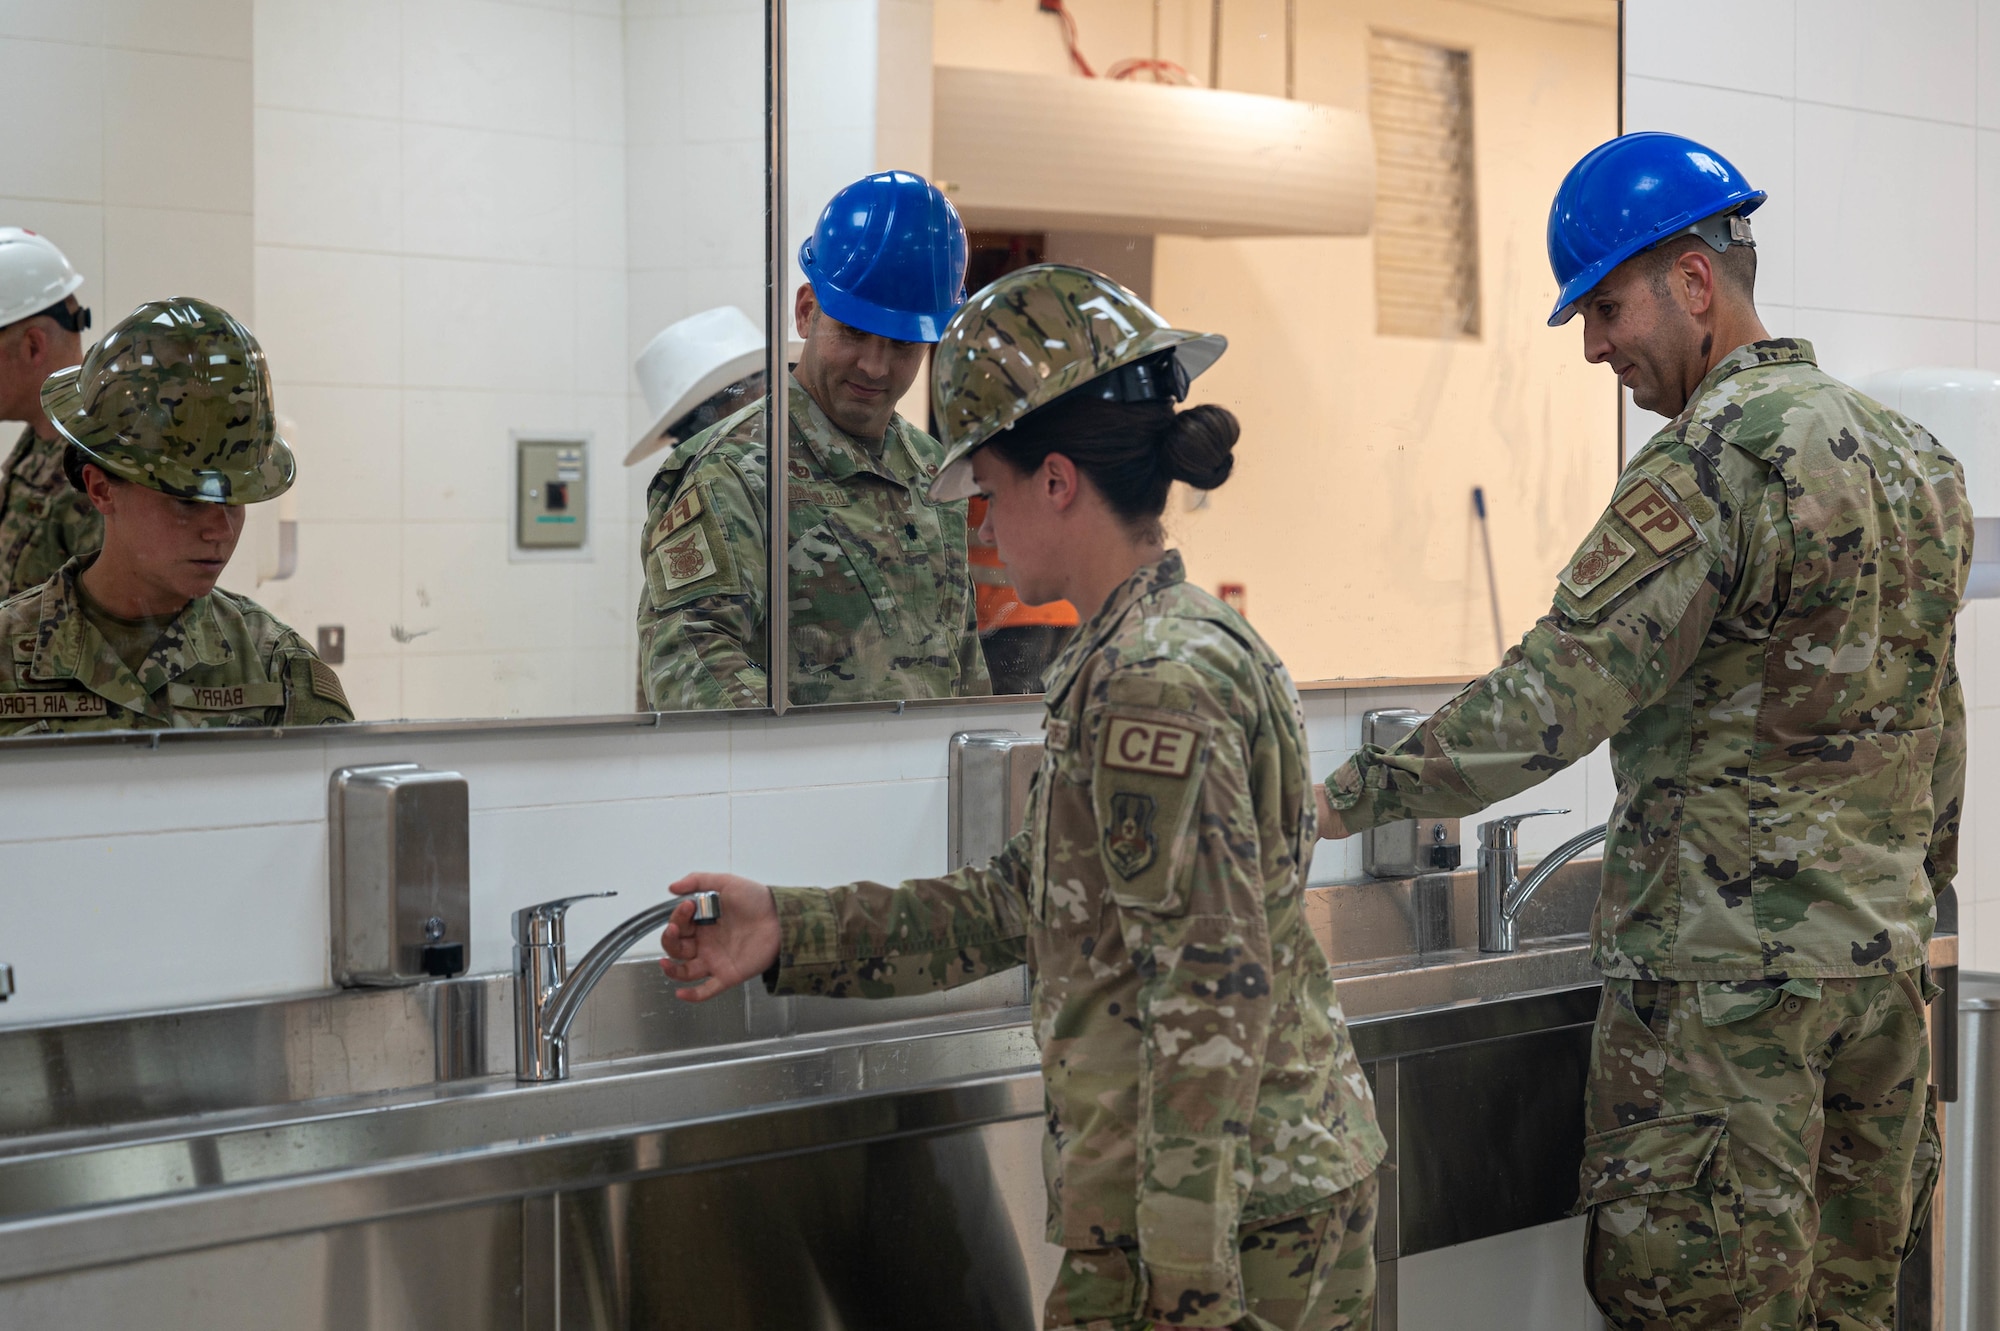 U.S. Air Force Capt. Kaitlyn Barry, left, 386th Expeditionary Civil Engineer Squadron, and Lt. Col. Benjamin Carlson, commander of the 386th ECES, inspect the sinks of the renovated dining facility at Ali Al Salem Air Base, Kuwait, May 20, 2022. The facility’s fire suppression was improved and showcases an enduring presence on base as service members move from the expeditionary dining facility. (U.S. Air Force photo by Senior Airman Natalie Filzen)